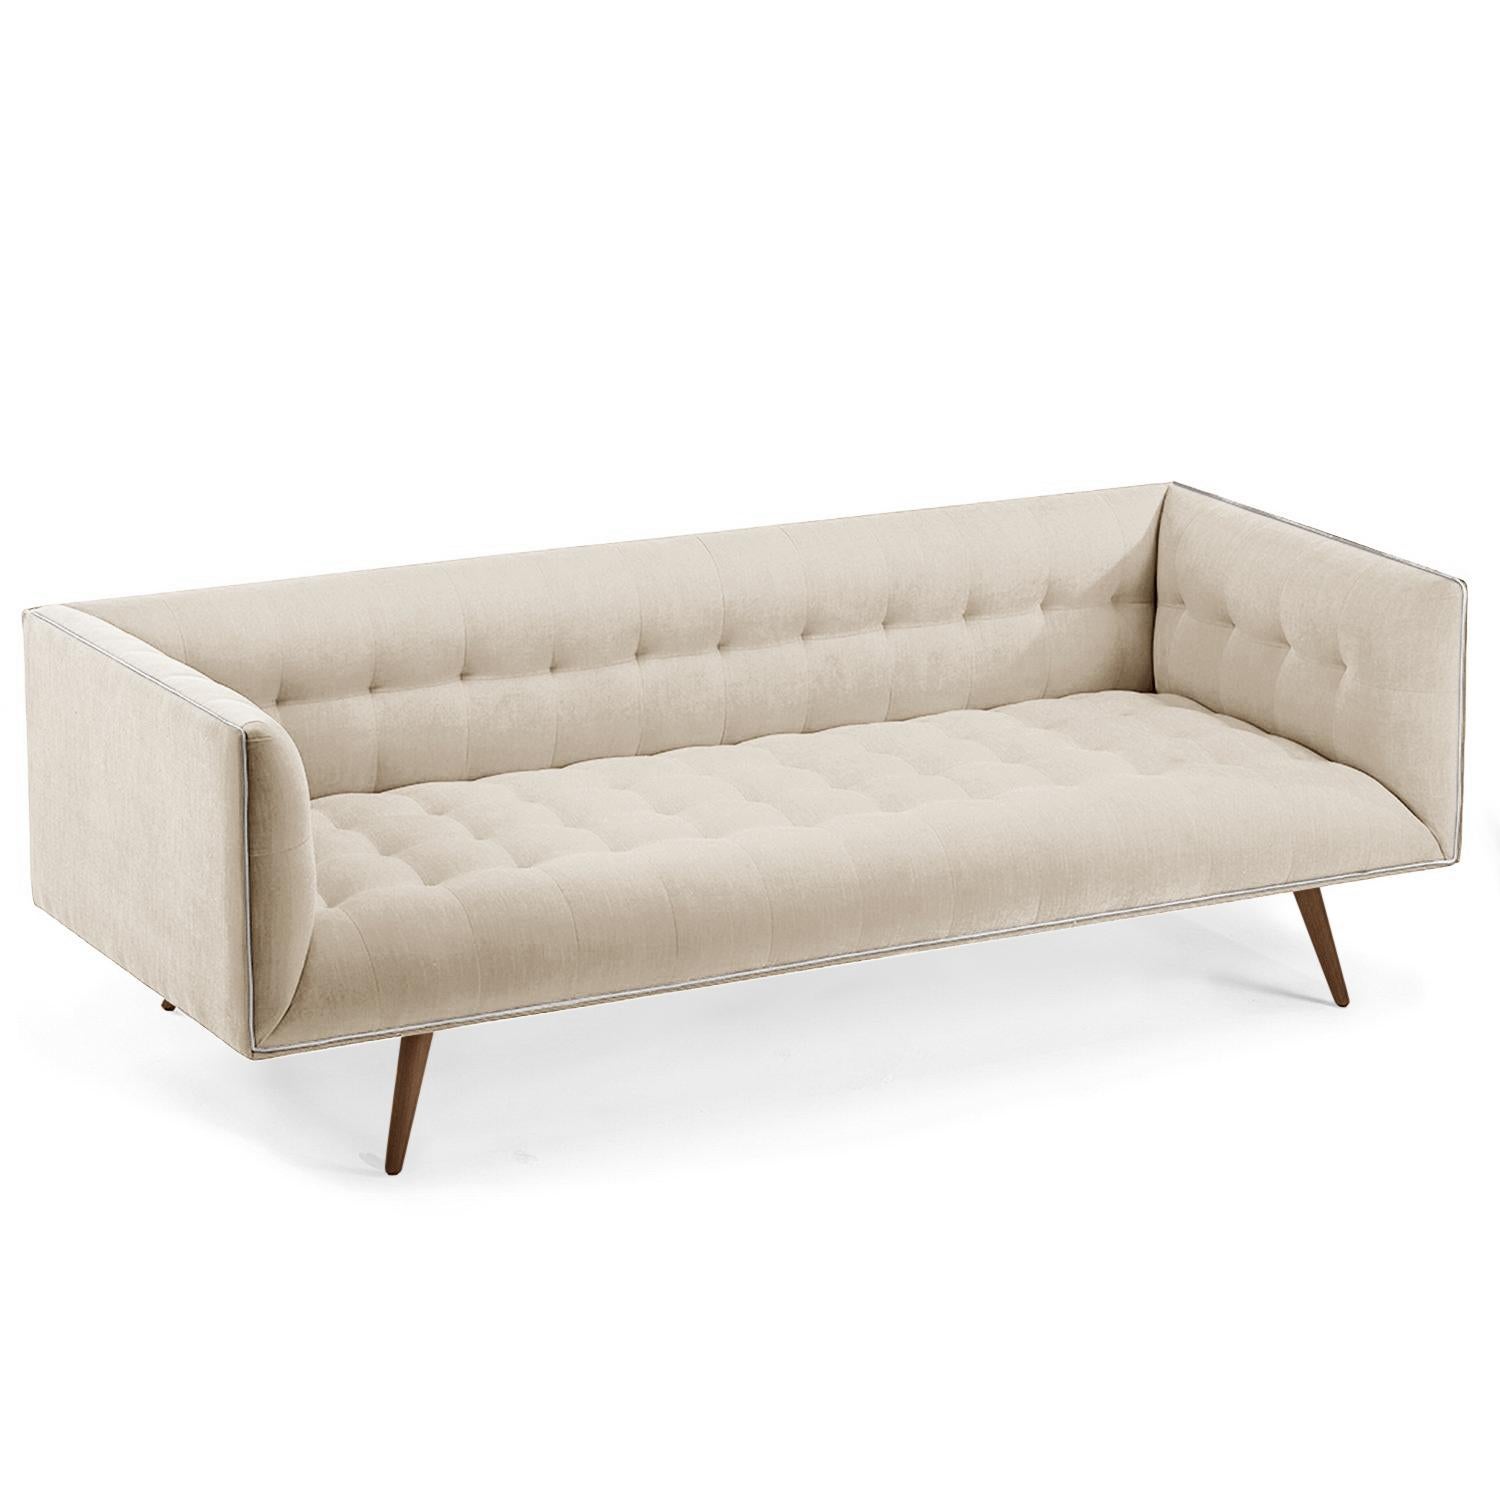 Portuguese Dust Sofa, Large with Beech Brown For Sale